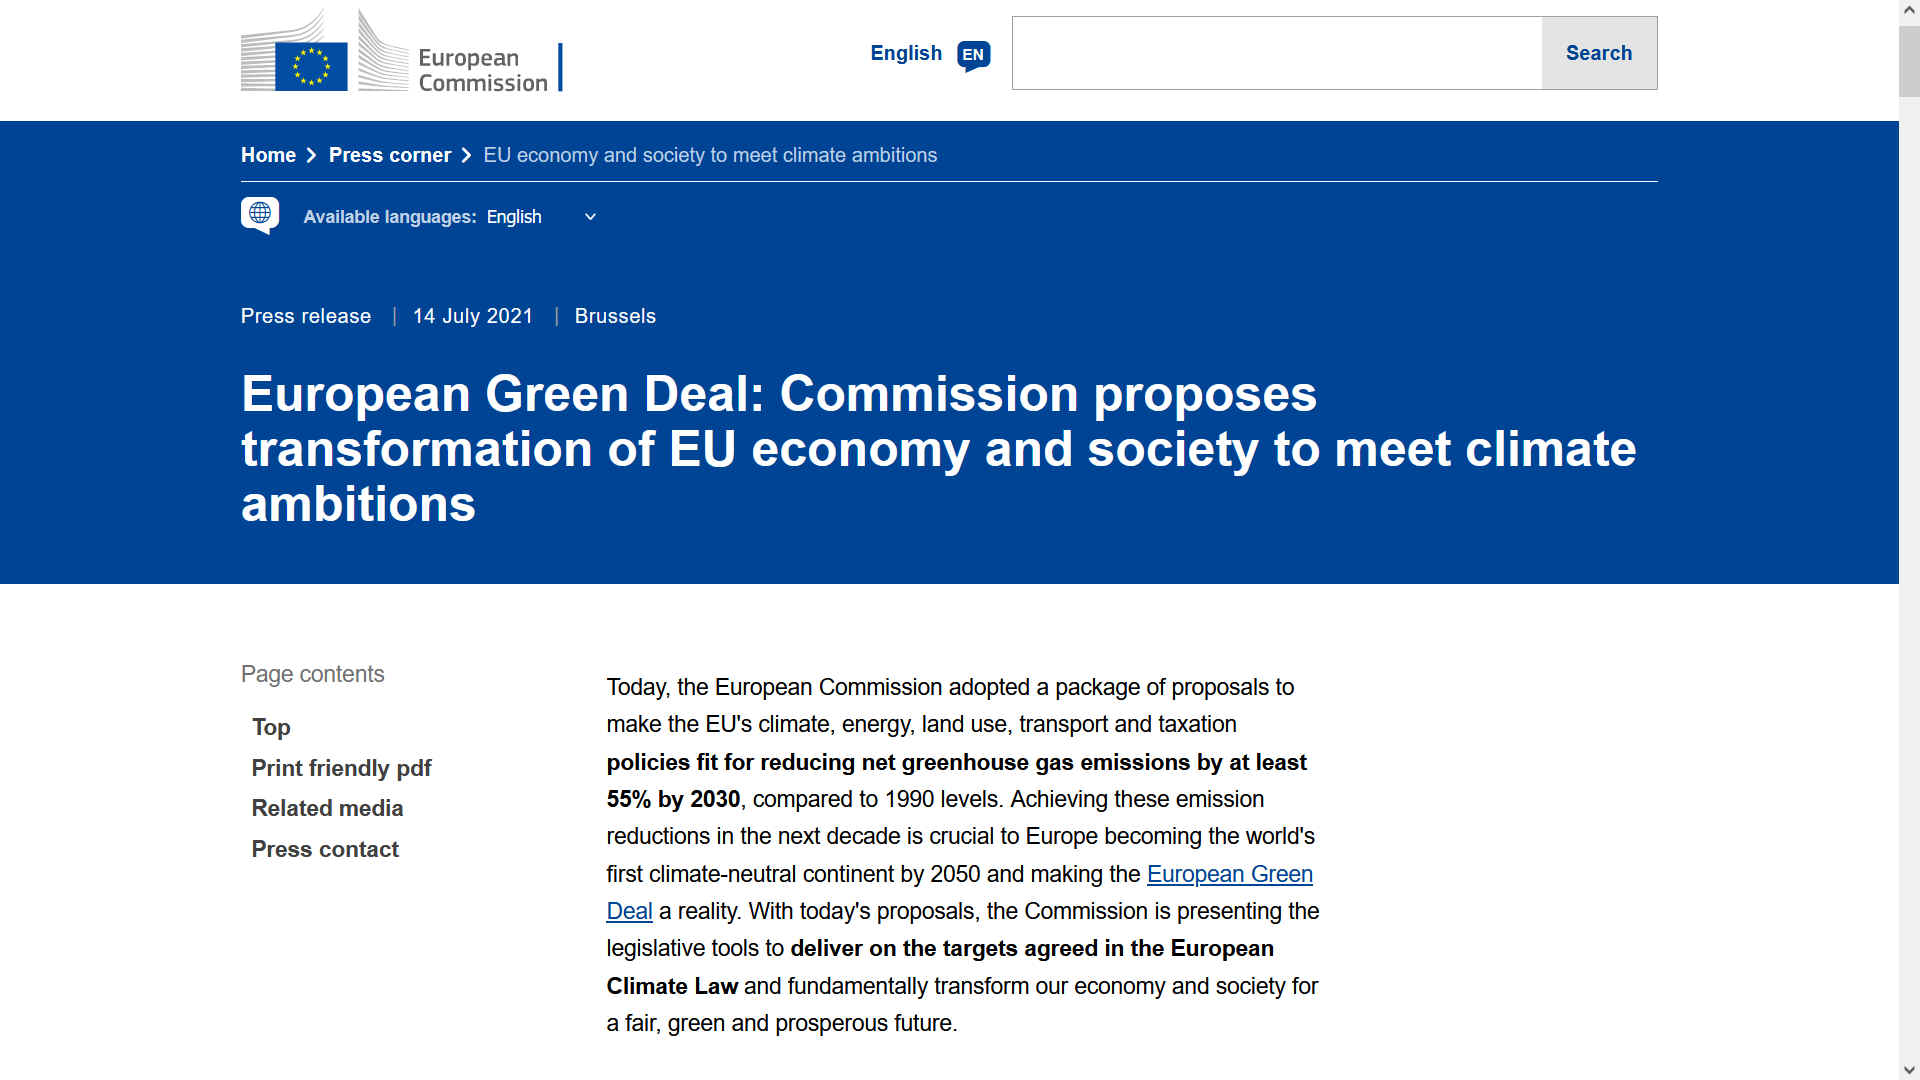 European Green Deal transformation proposals and ambitions